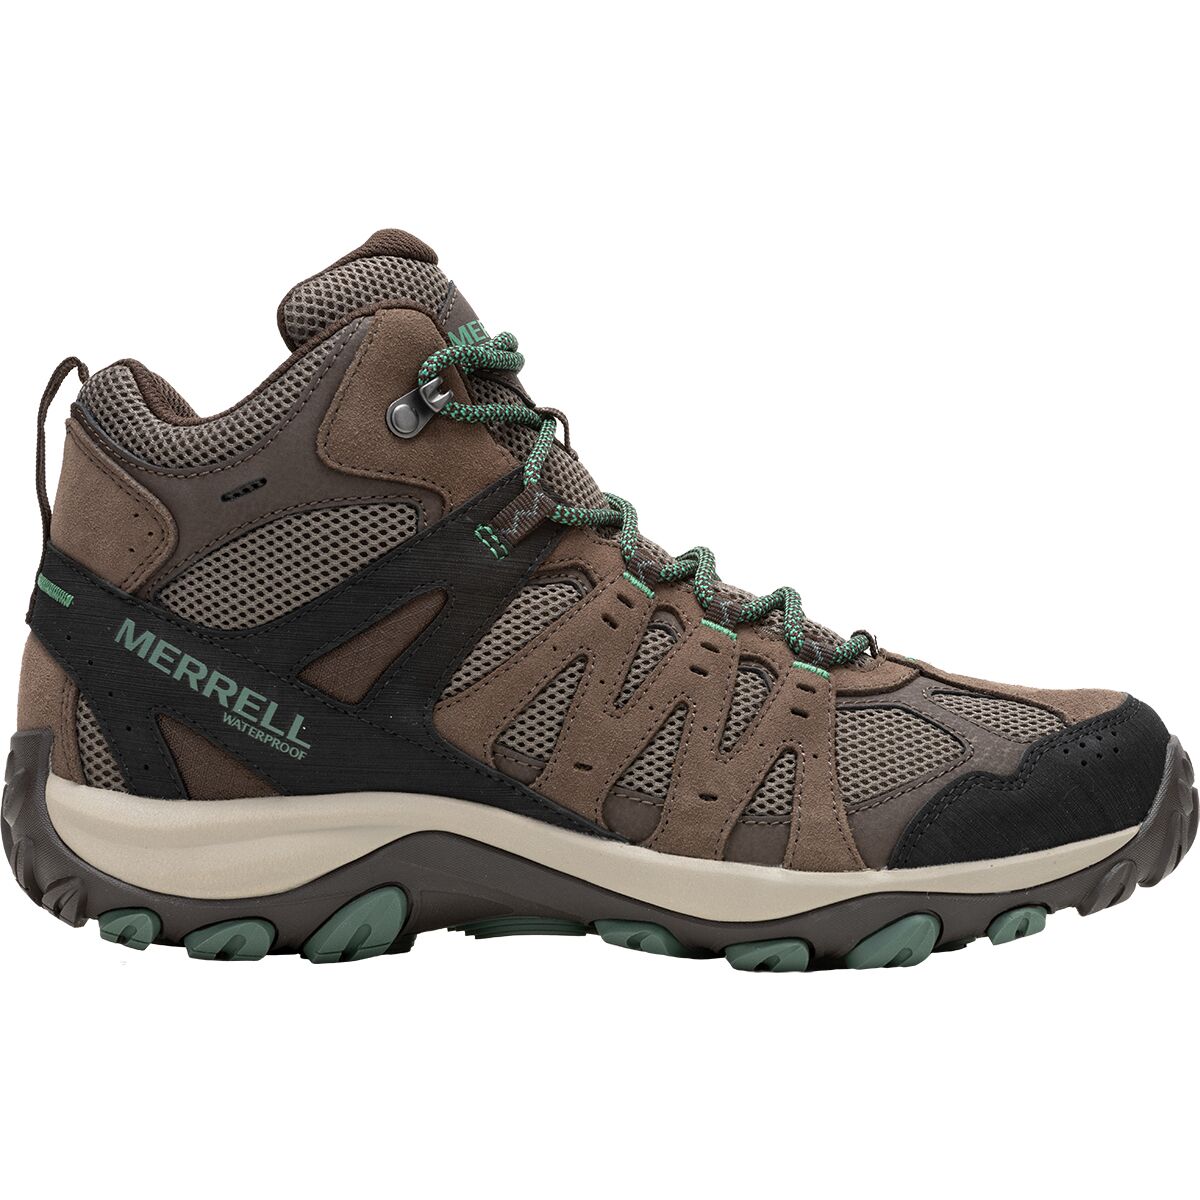 Accentor 3 Mid WP Hiking Shoe - Men